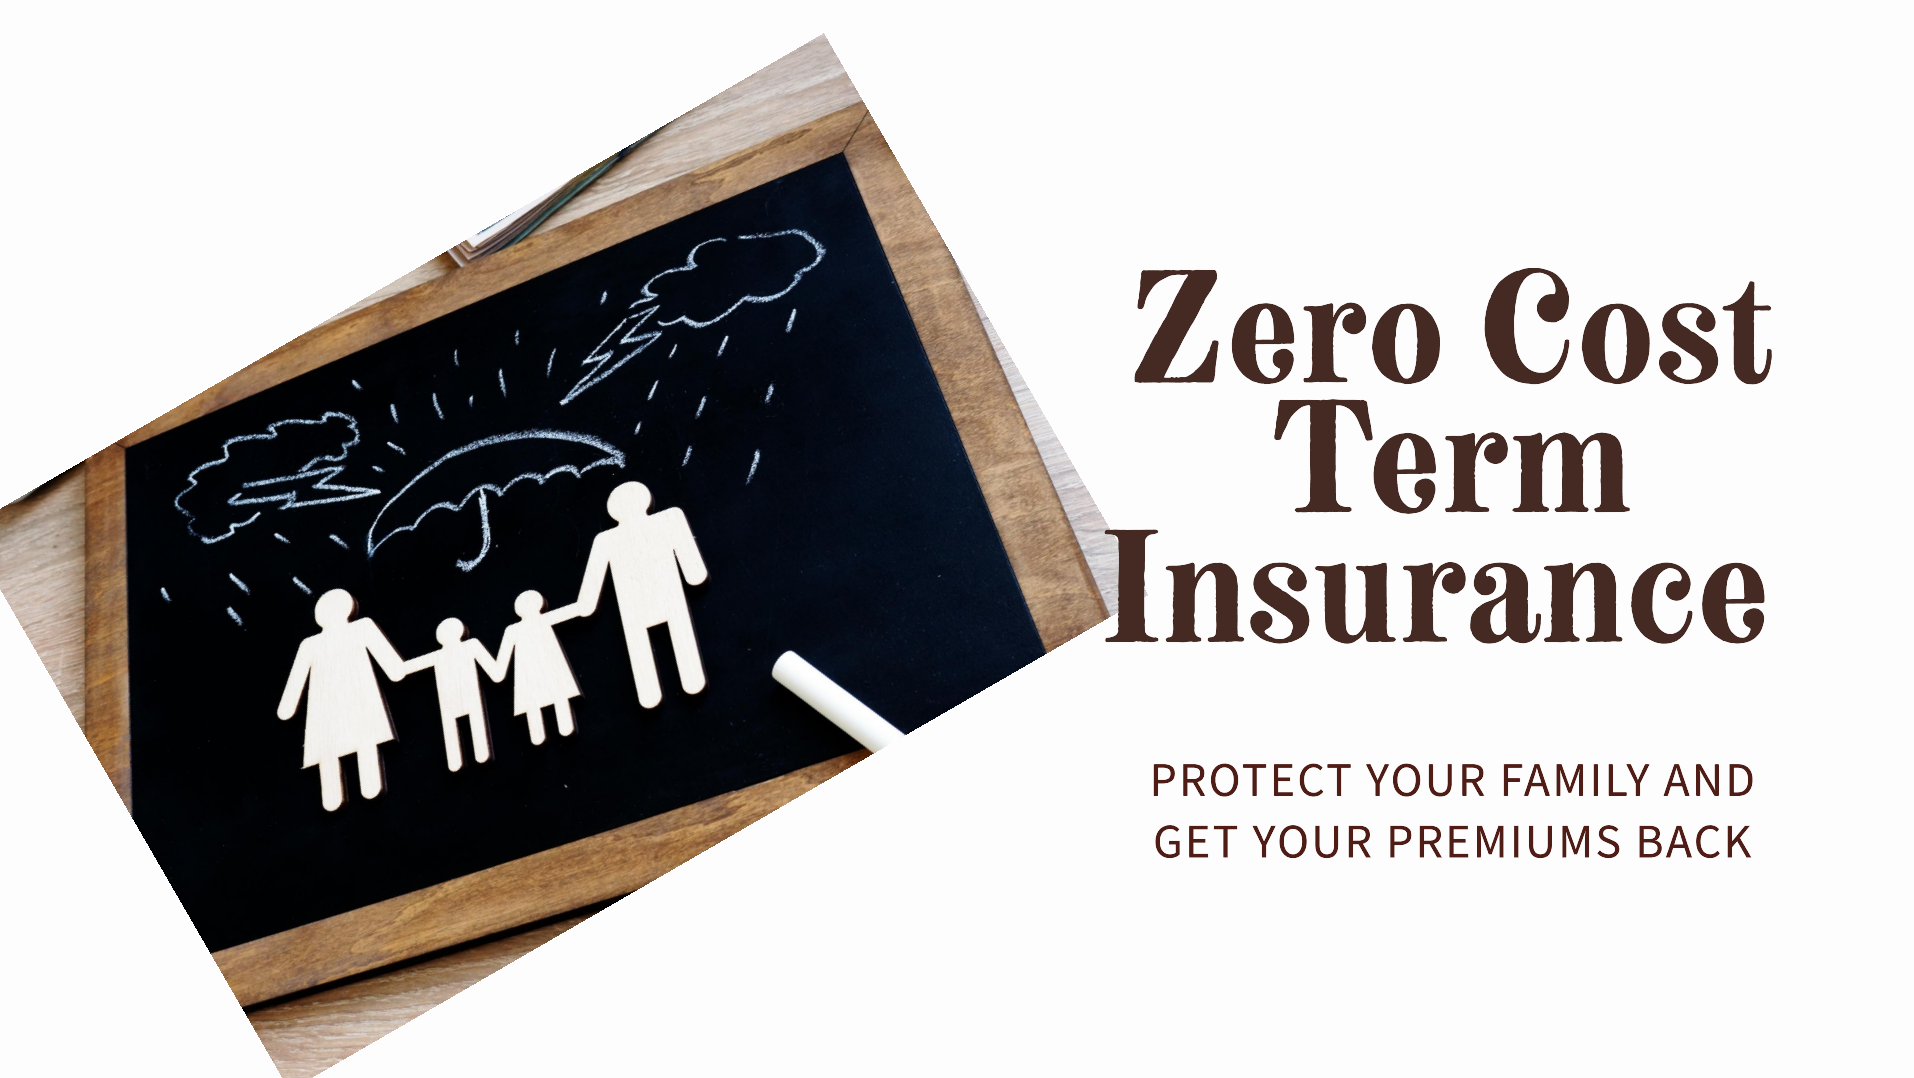 You are currently viewing Zero Cost Term Insurance: The Perfect Way to Protect Your Family and Get Your Premiums Back!